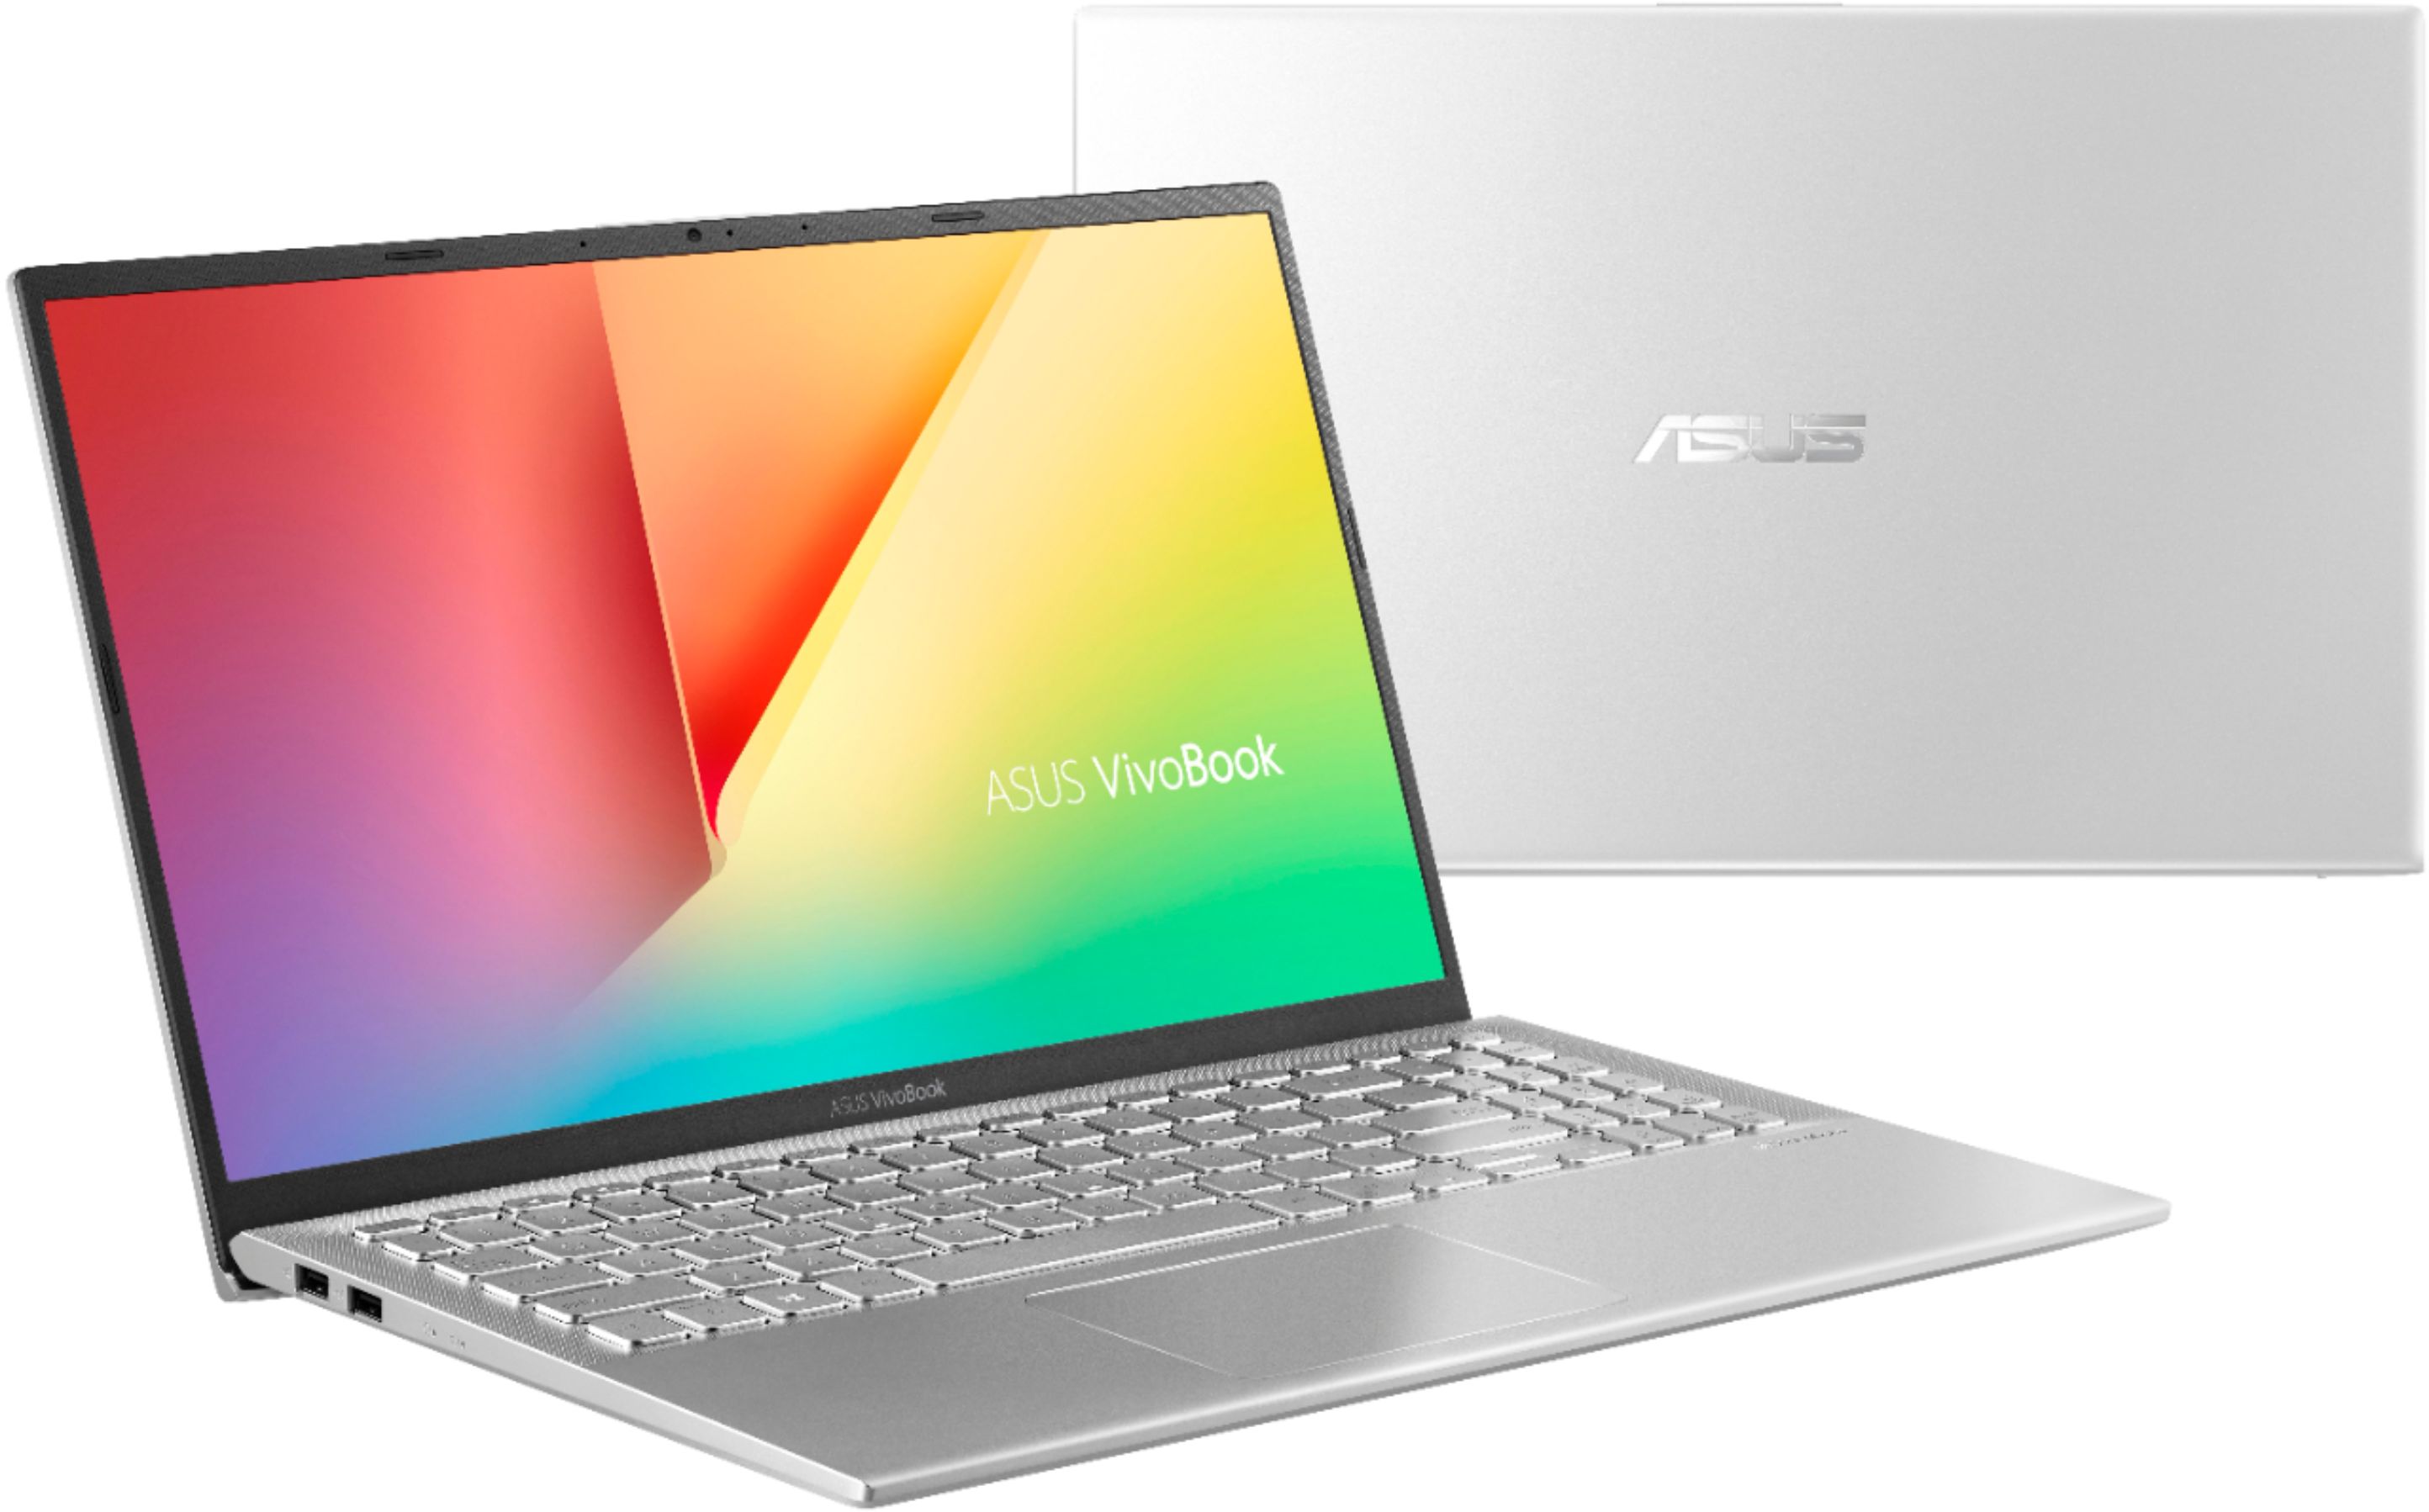 ASUS VivoBook 15 review: One of the best sub-$500 laptops available today